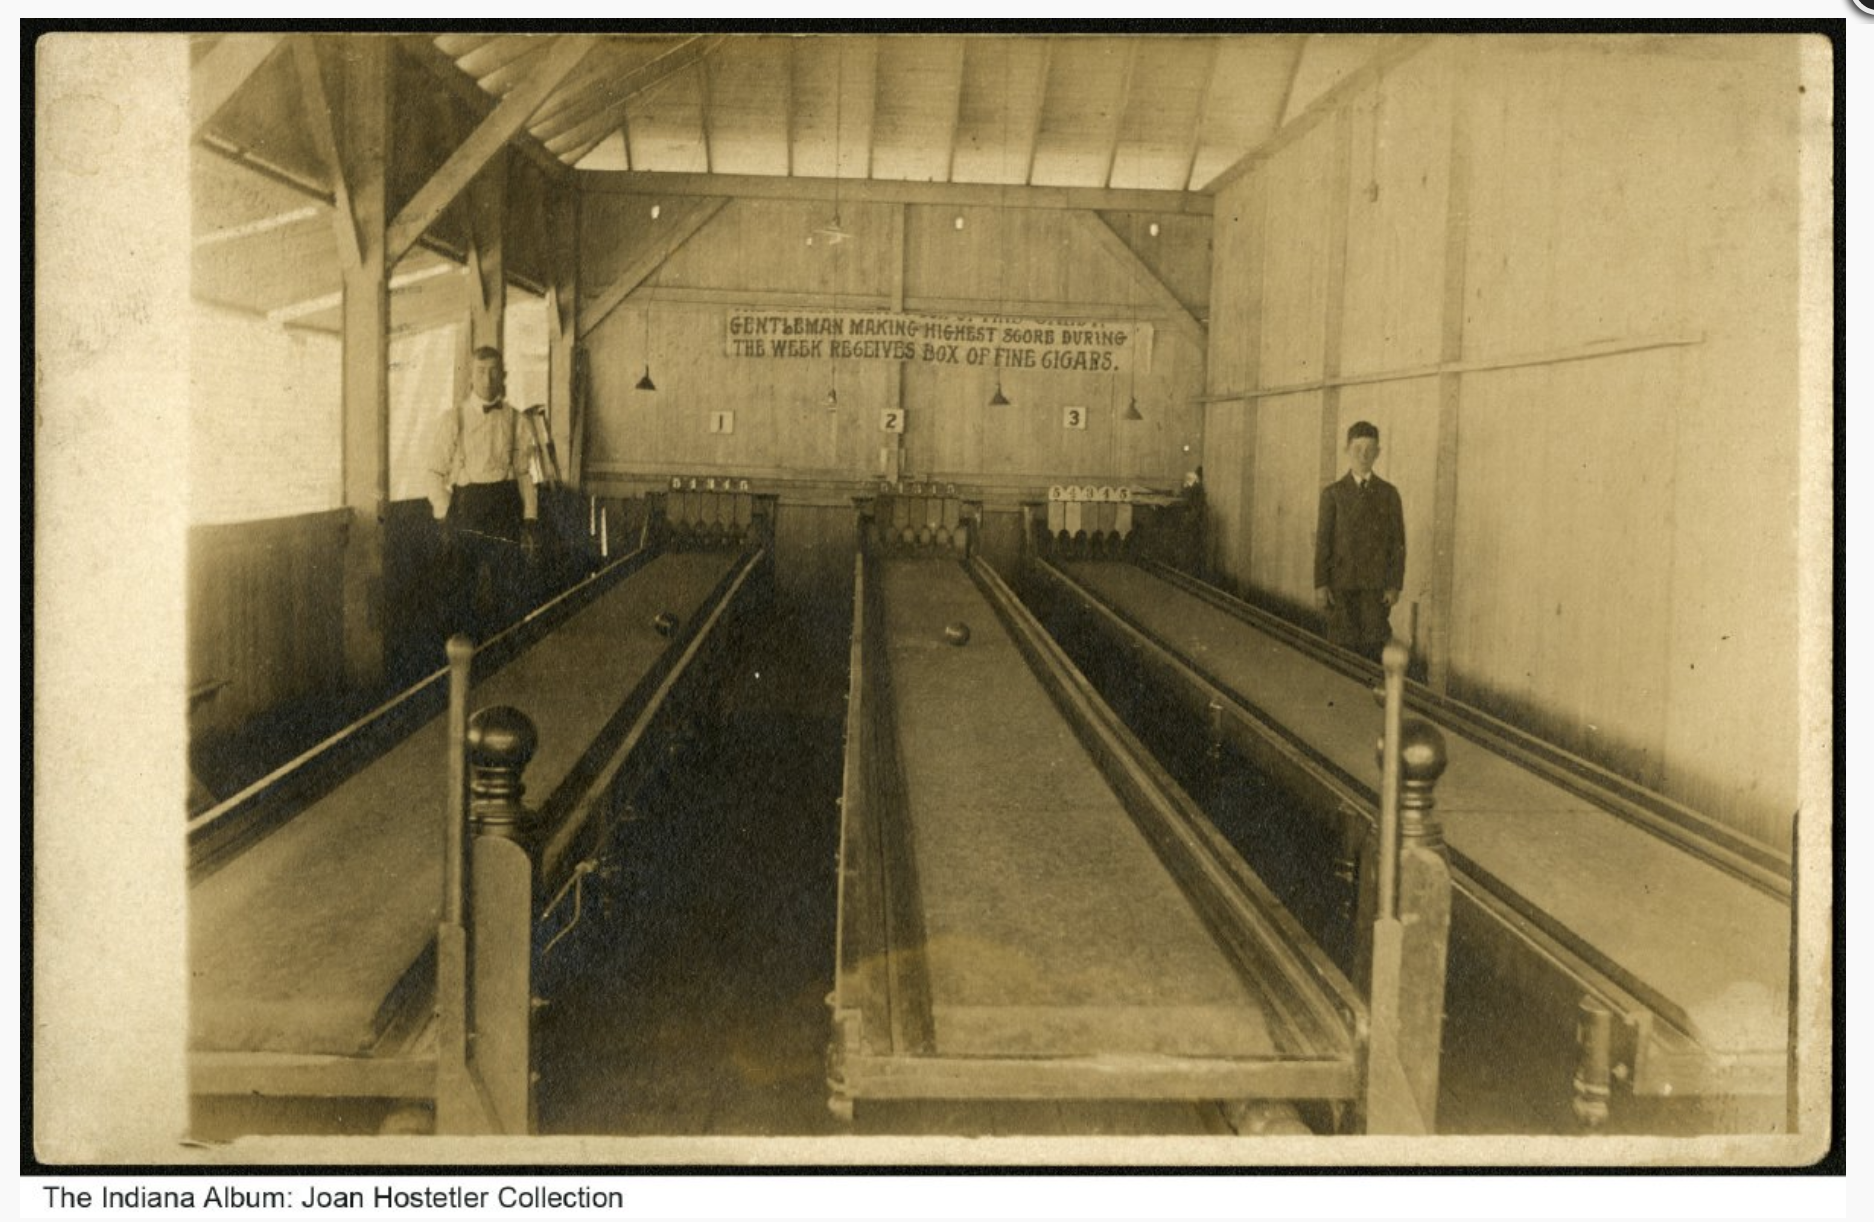 Three raised bowling lanes. Two men stand at the end of the lanes.